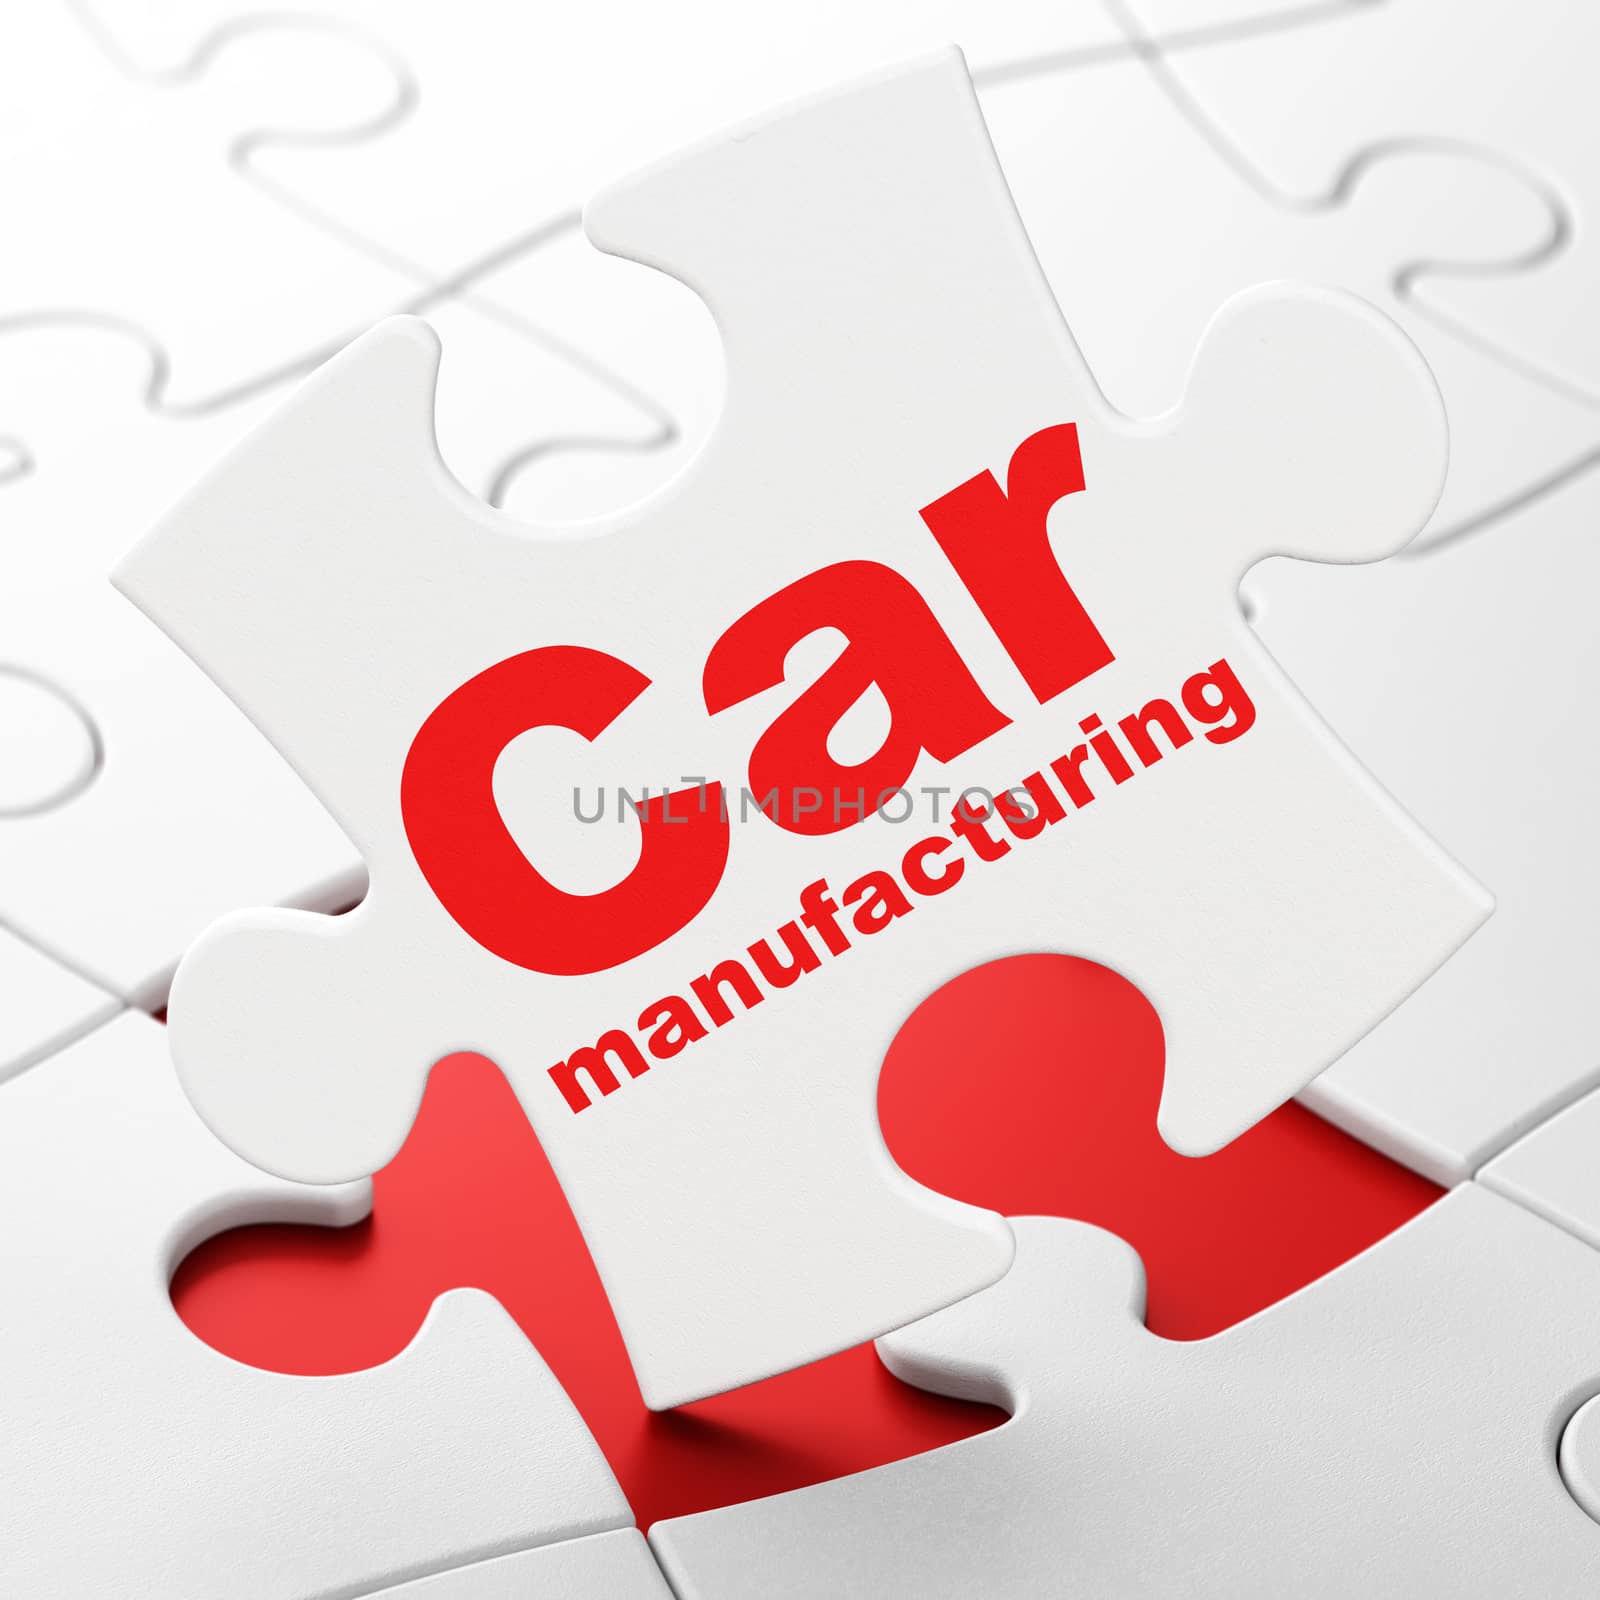 Manufacuring concept: Car Manufacturing on White puzzle pieces background, 3D rendering